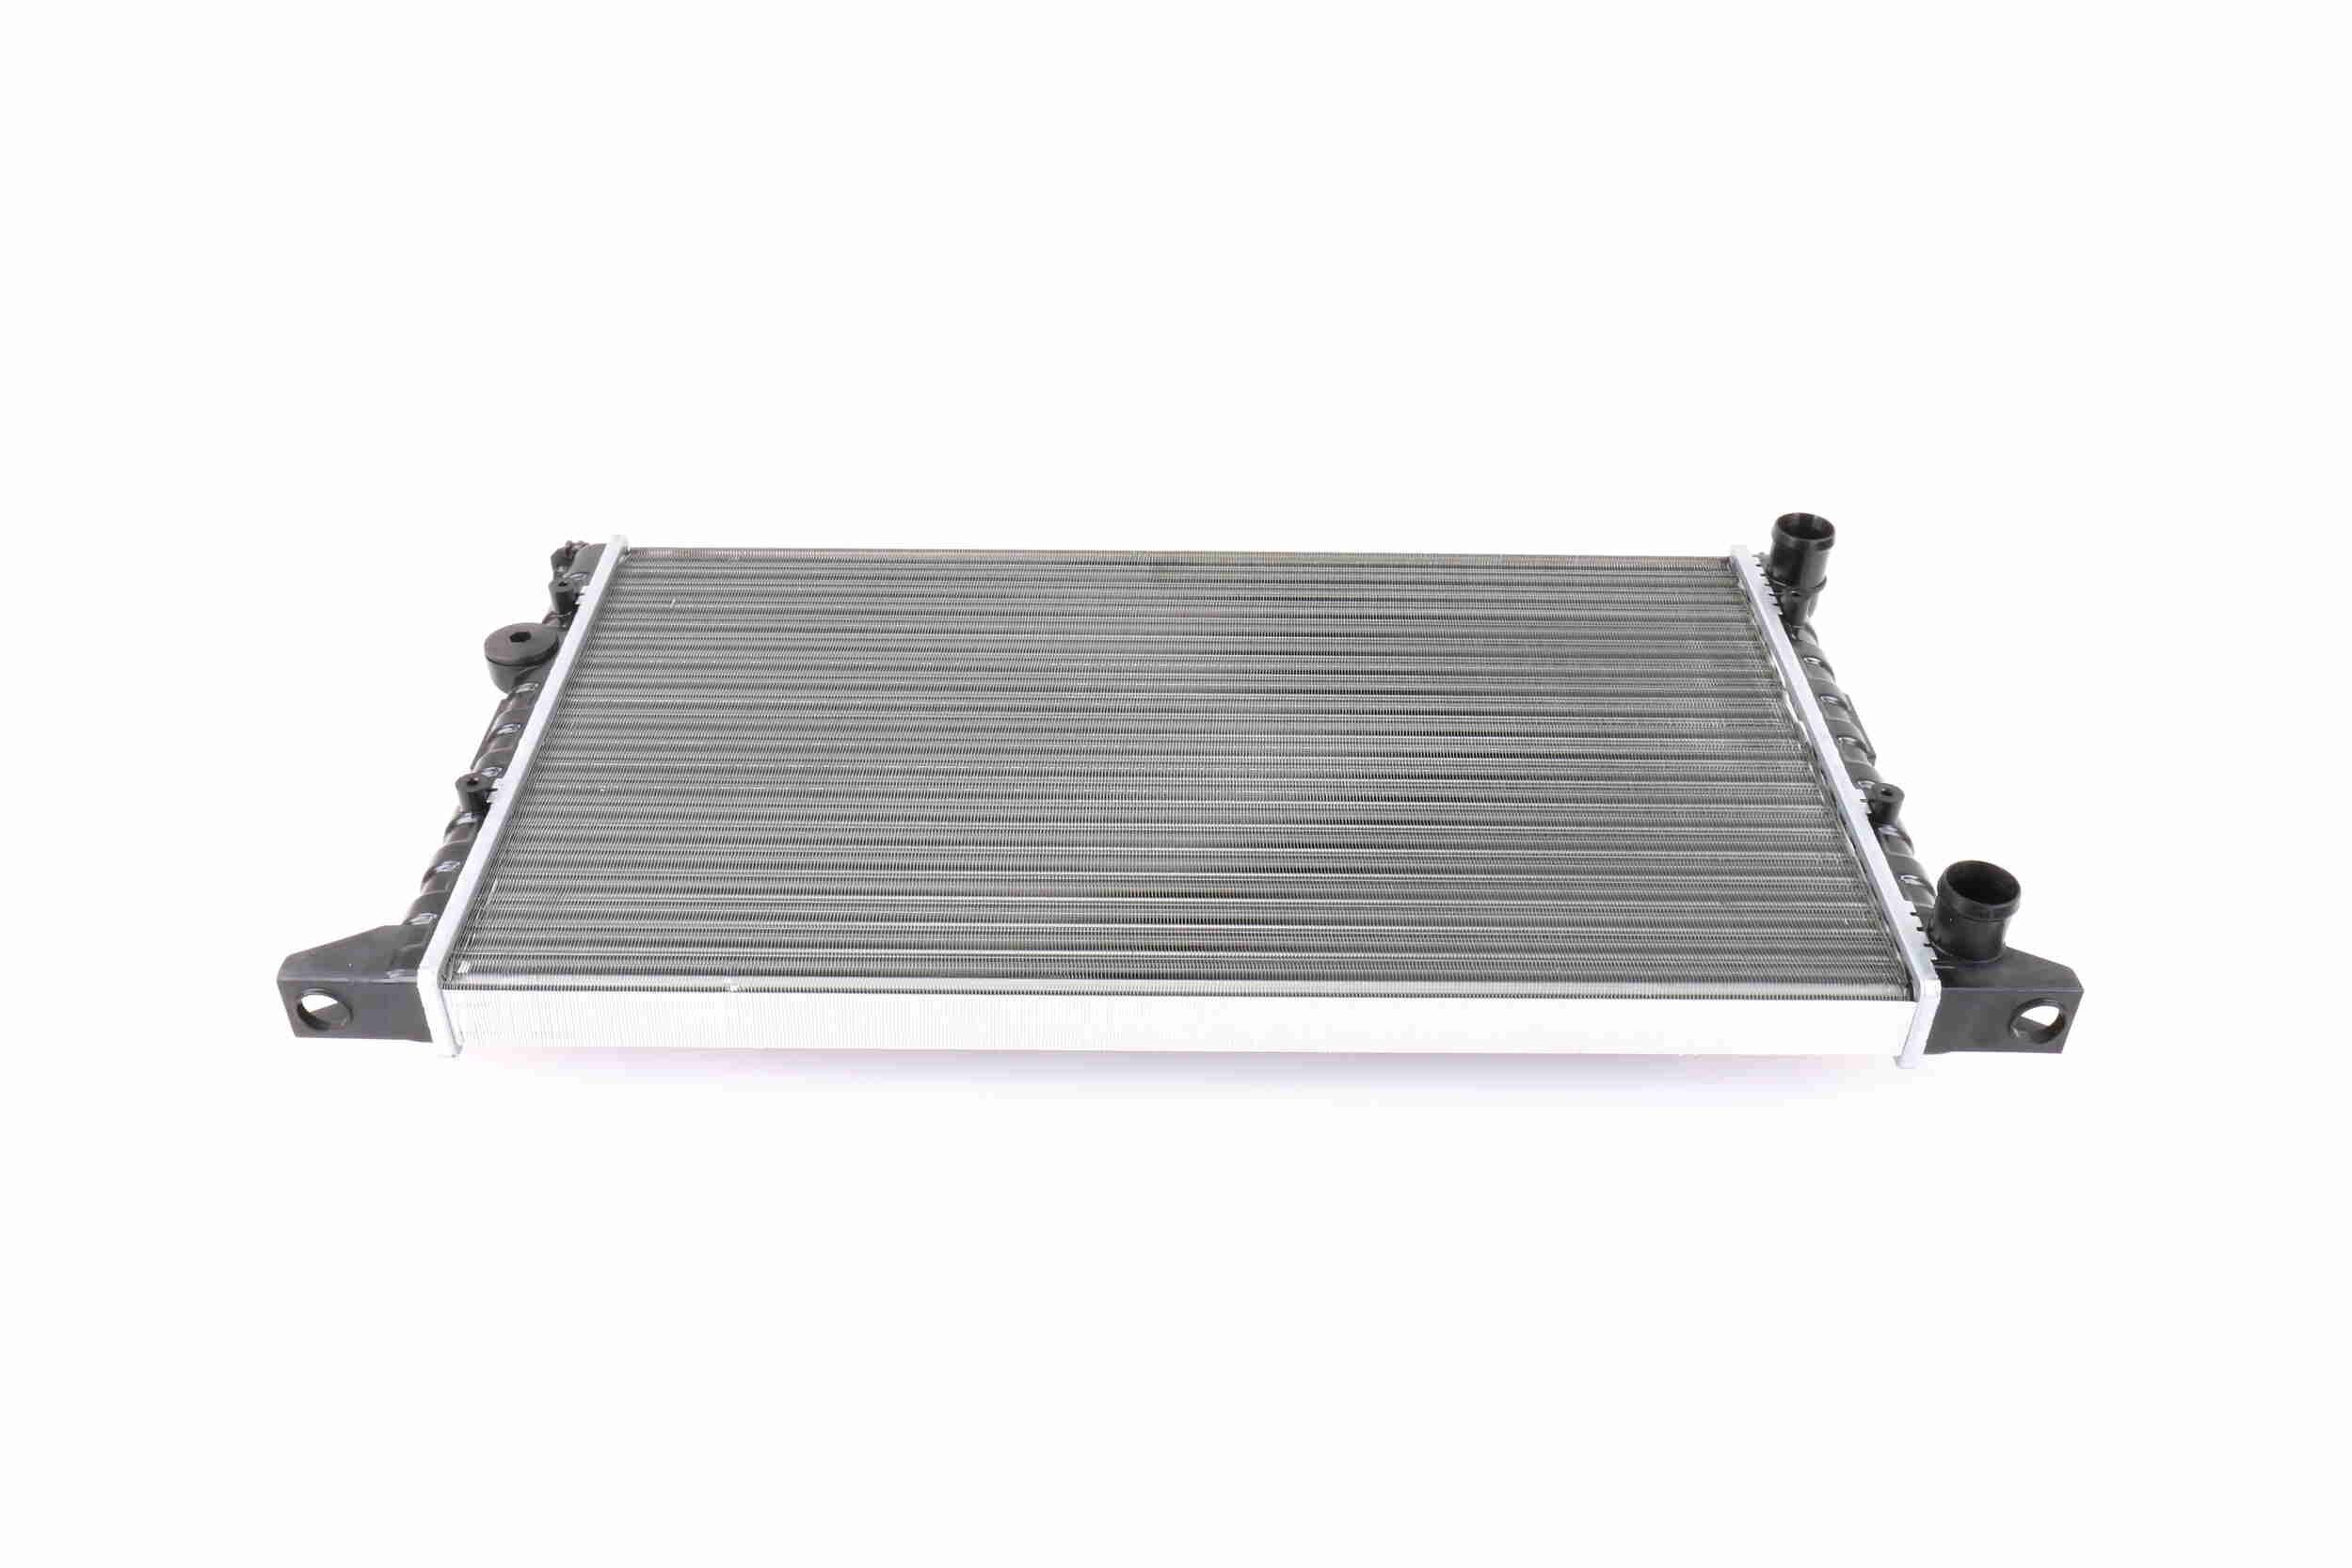 VEMO V15-60-5055 Engine radiator for vehicles with air conditioning, 628 x 378 x 34 mm, Original VEMO Quality, Manual Transmission